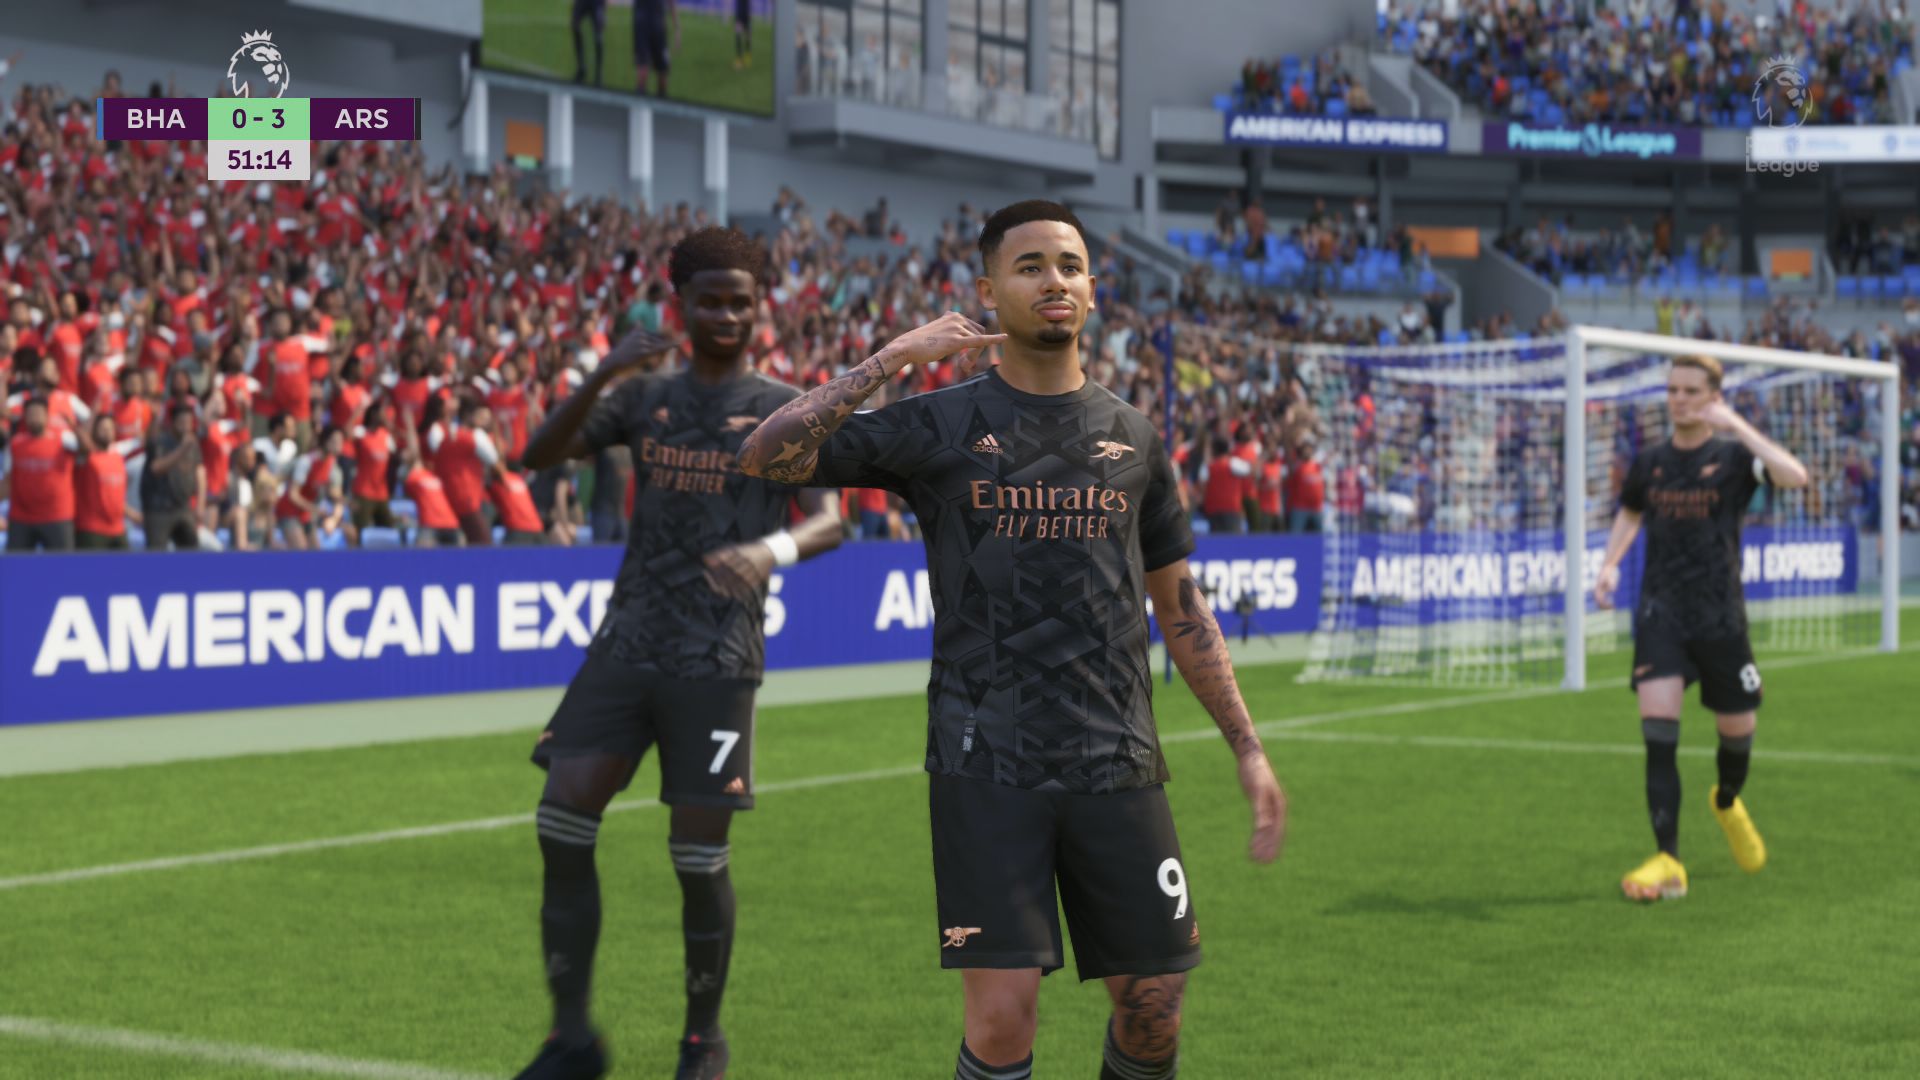 How To Change Difficulty In FIFA 23 - Complete Guide